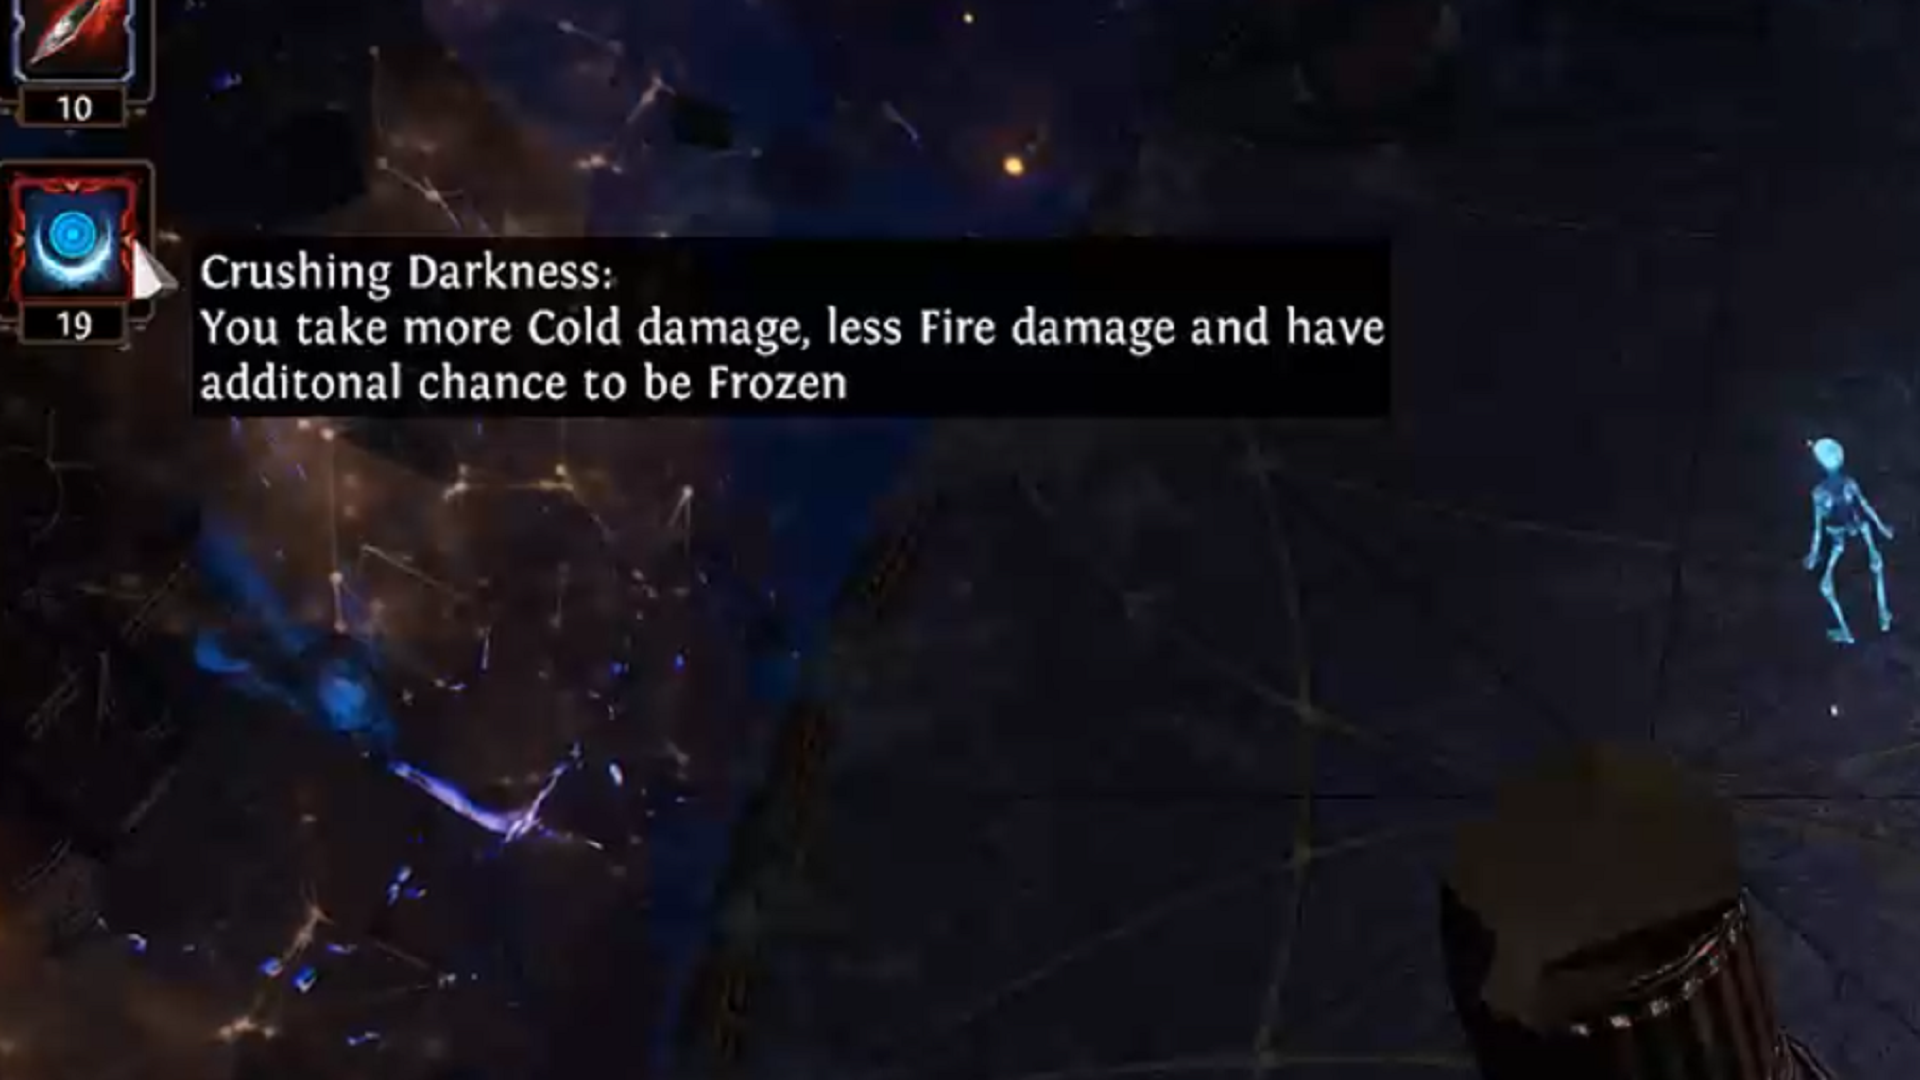 The Crushing Darkness debuff in Path Of Exile